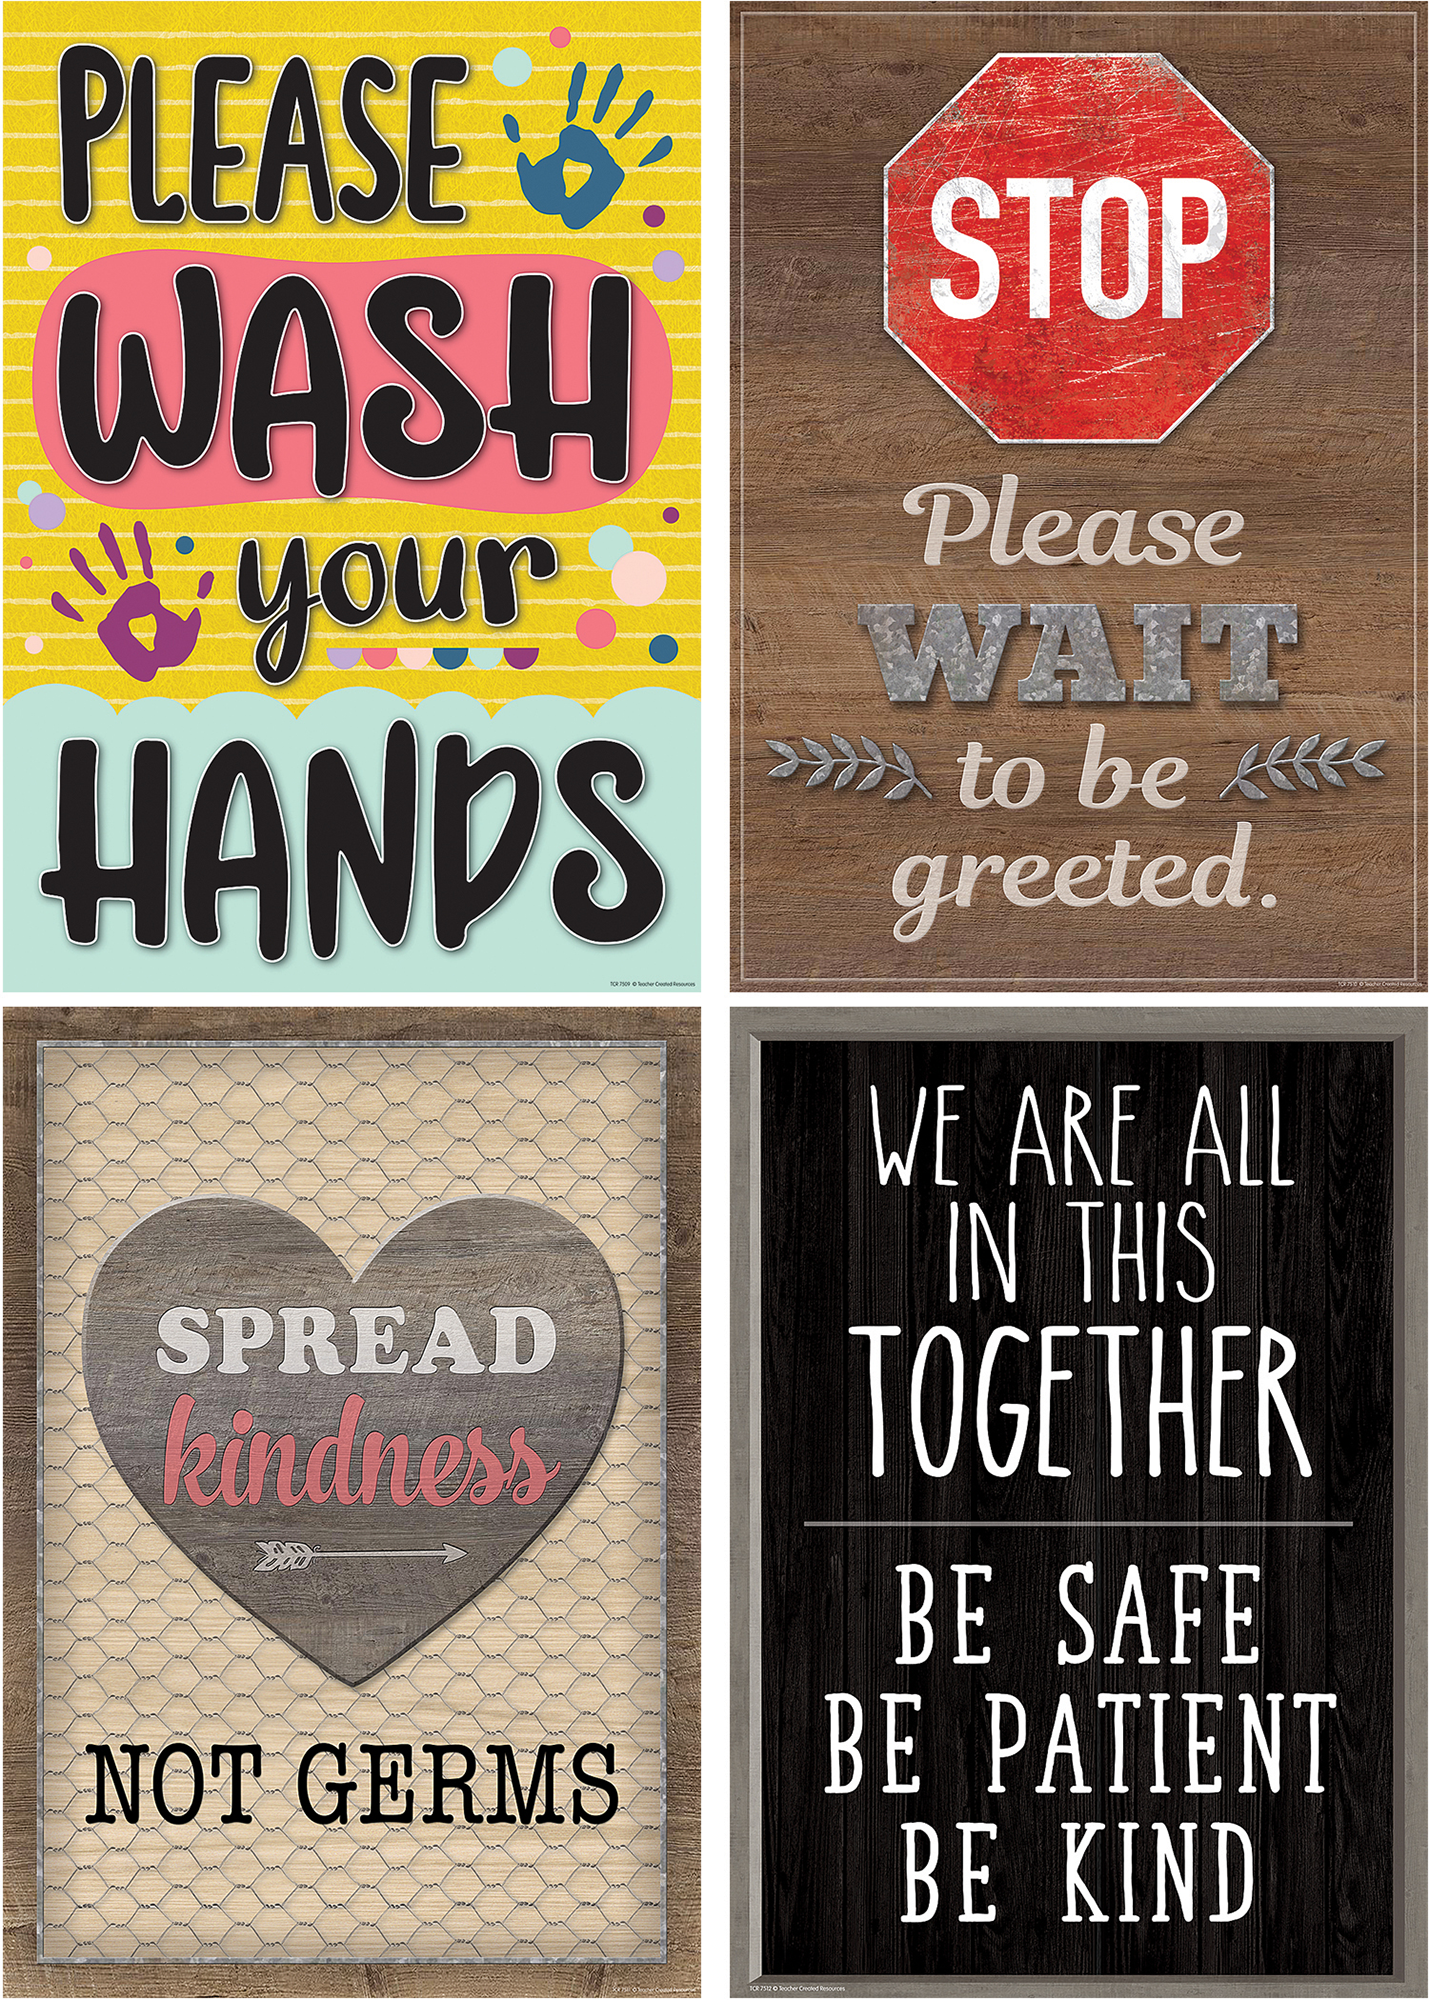 Remind students about the importance of fighting the spread of germs and best practices for keeping themselves and others safe and healthy. Perfect for displaying in classrooms, libraries, lunchrooms, and school offices.